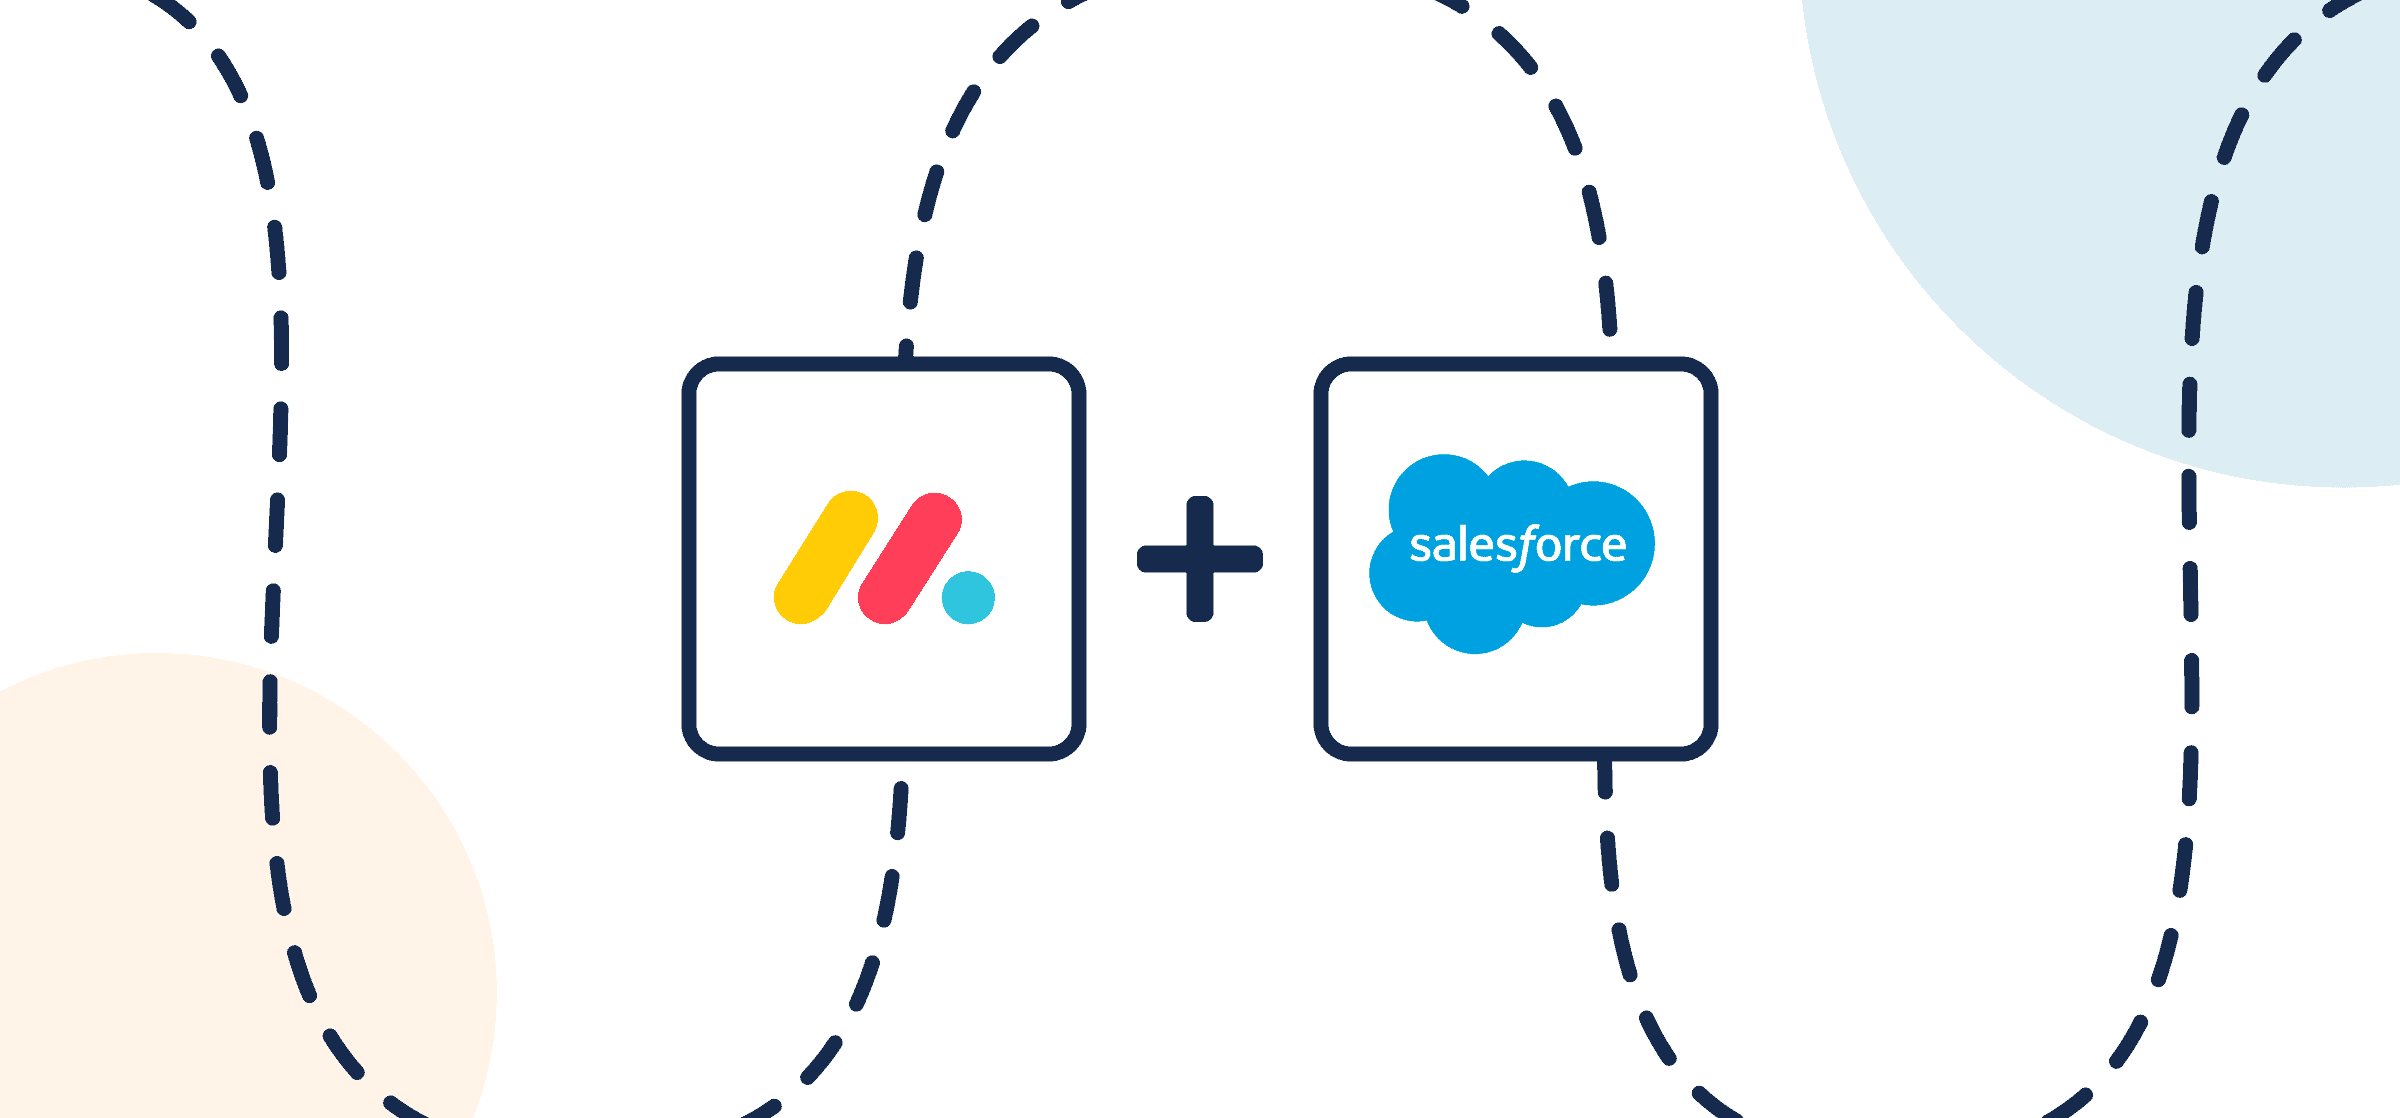 Featured image illustrating a step-by-step guide on syncing monday.com to Salesforce through Unito, depicted by the connected logos through circles and dotted lines.